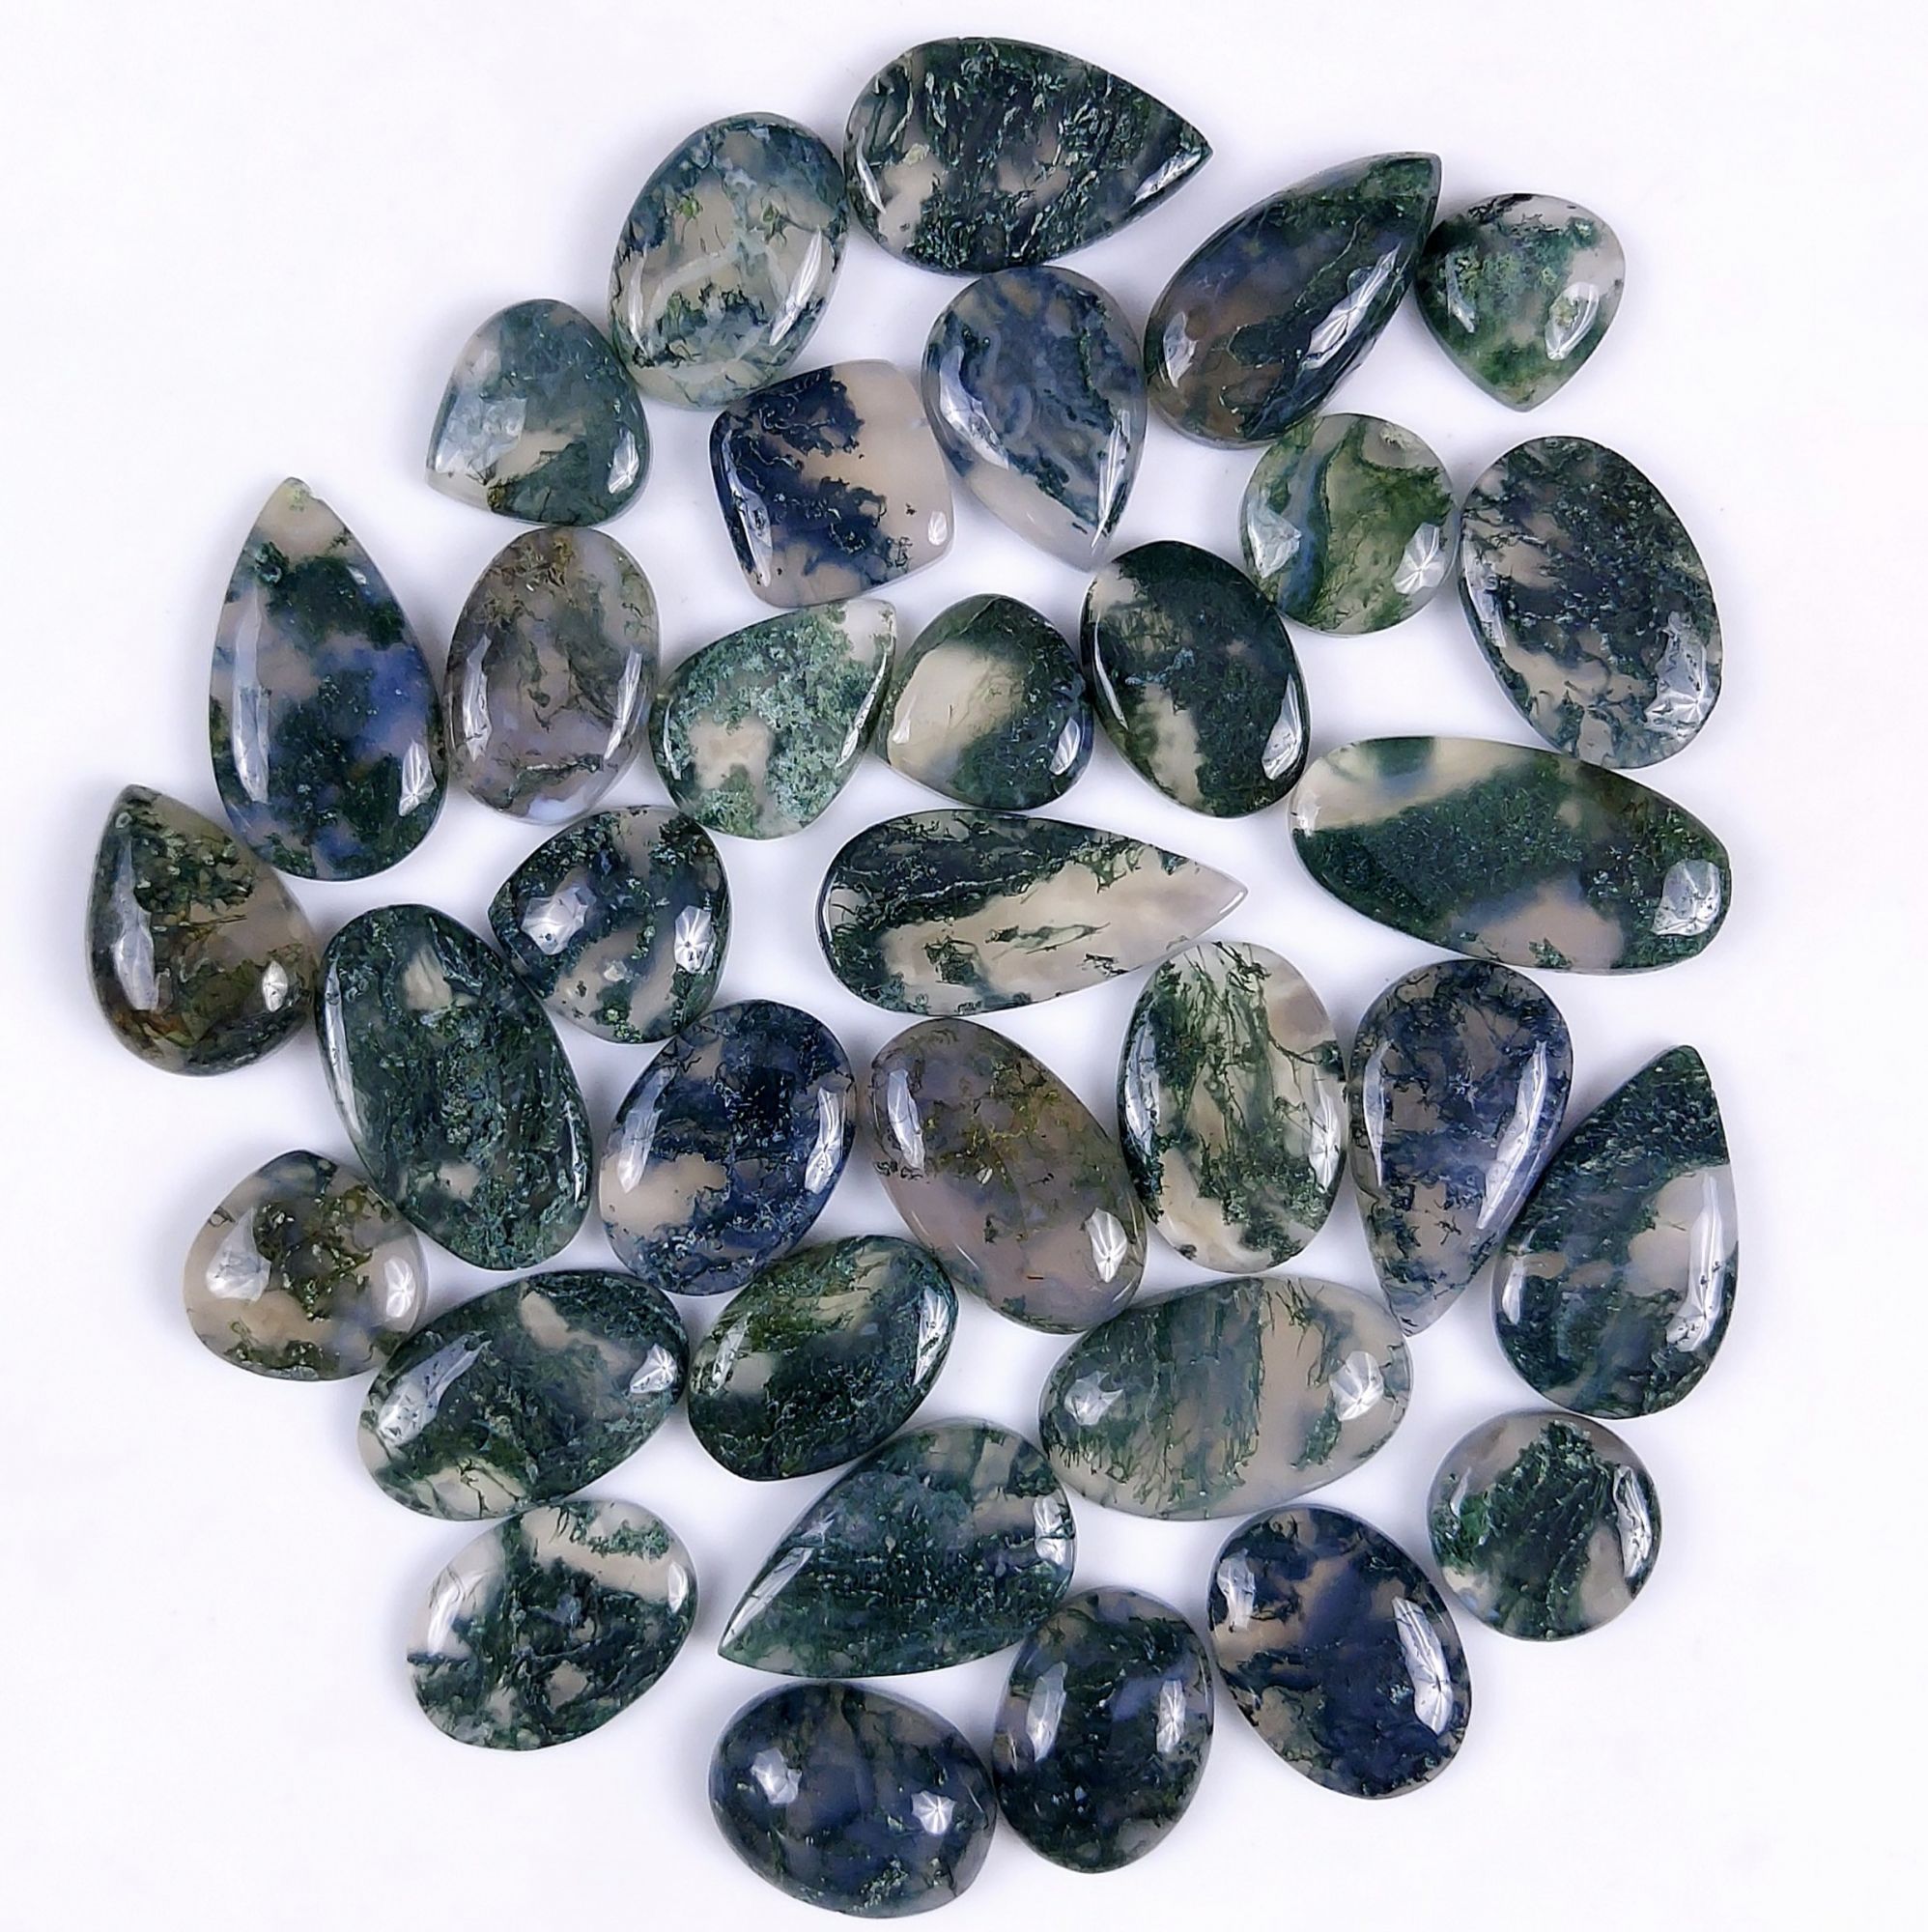 34Pcs 296Cts Natural Green Moss Agate Cabochon Lots Mixed Shapes And Sizes Moss Agate loose gemstone Cabochon Wholesale Lot 23x10 10x10mm#G-370